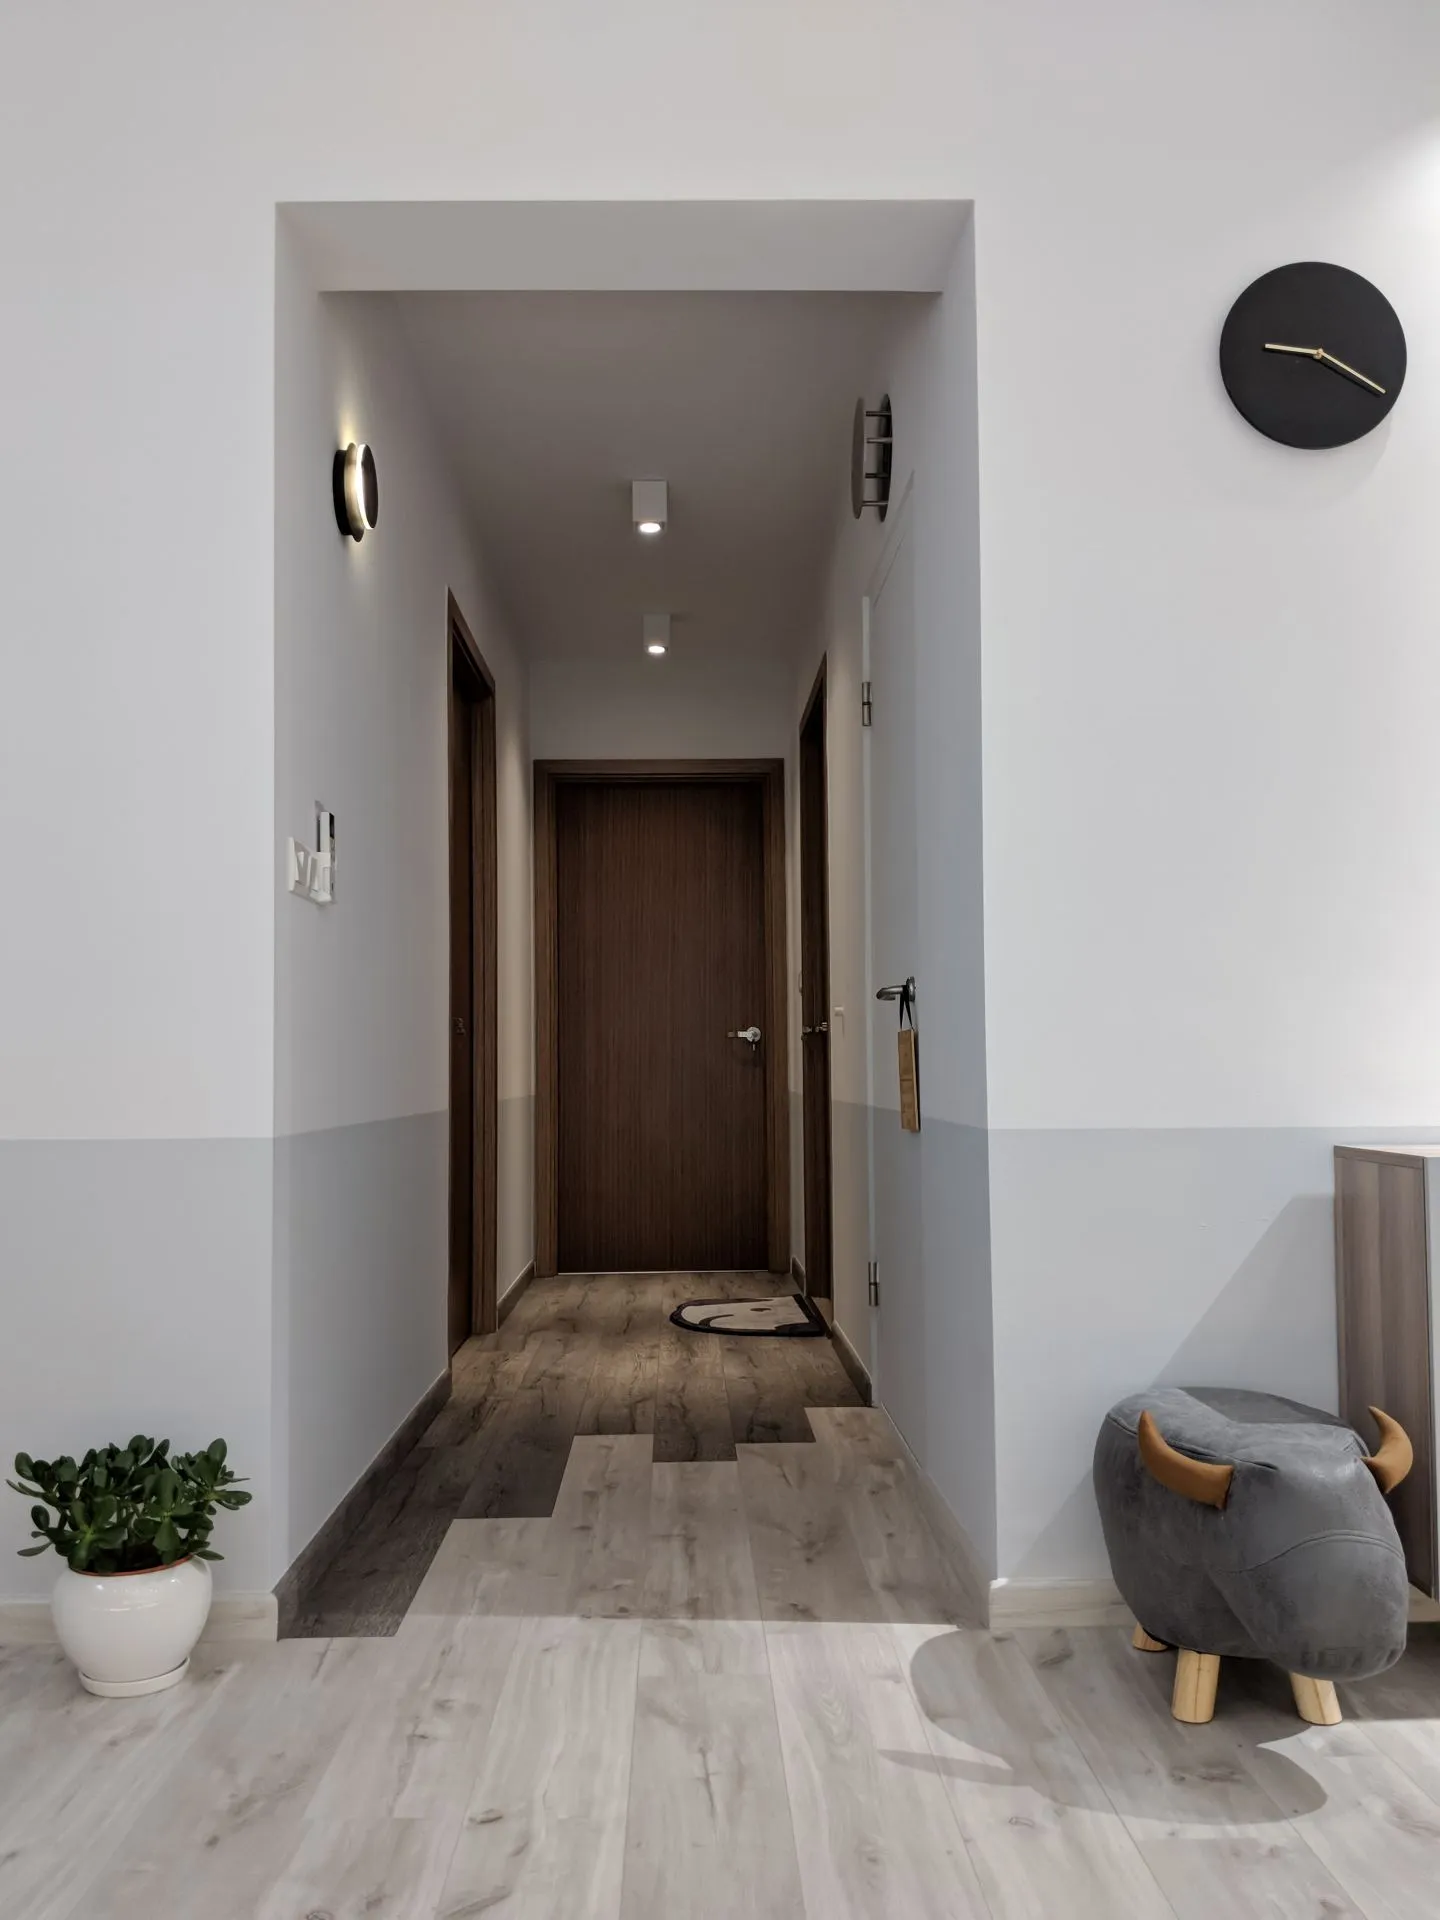 The corridor is less well lit by comparison. We love the way the colour of the floor changes as you get into the rooms. The accent light that is shaped like an eclipsed moon was an awesome and cheap find on Taobao as well.